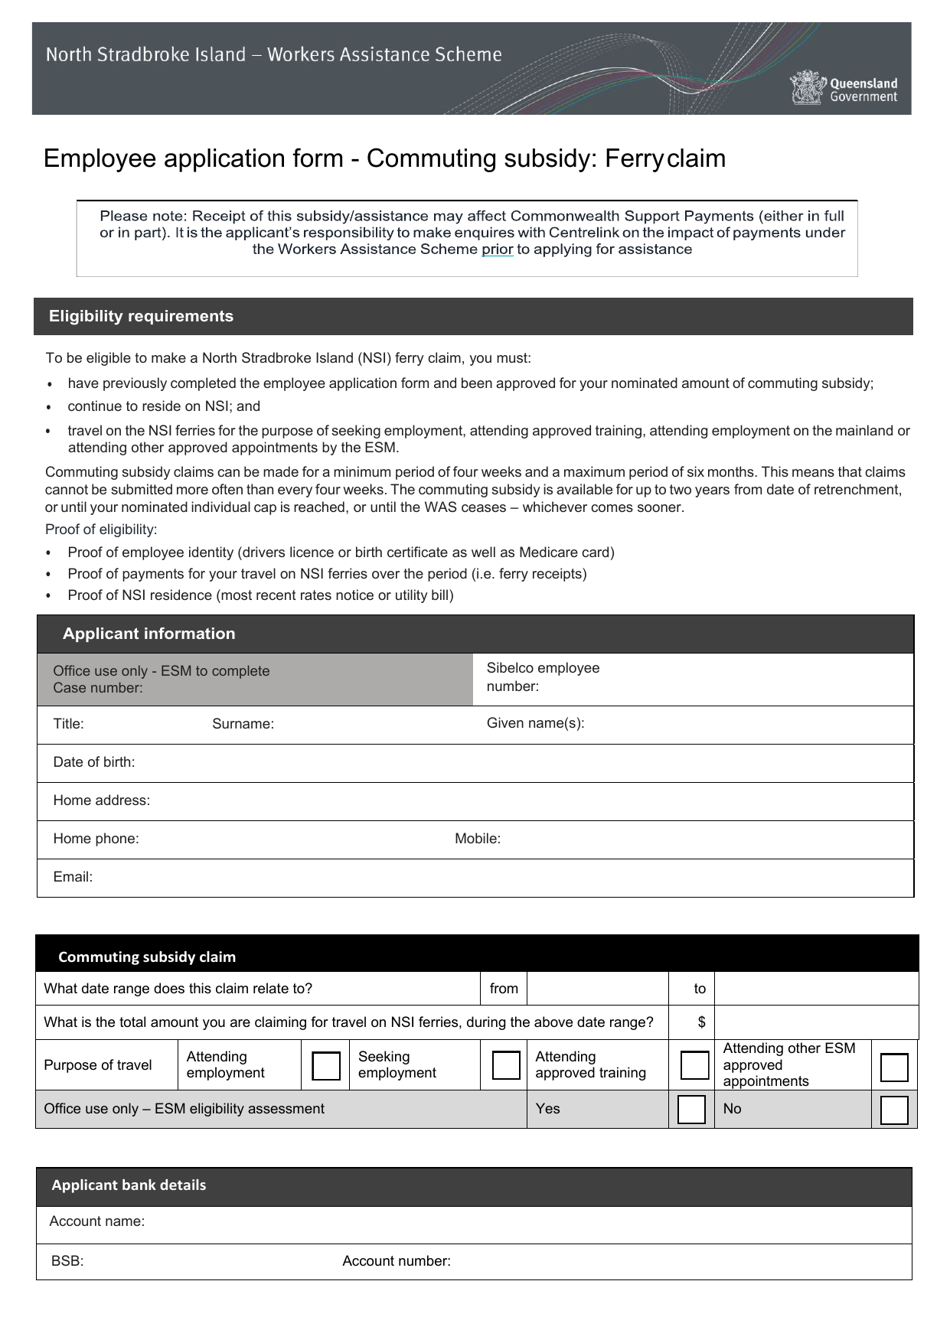 Employee Application Form - Commuting Subsidy: Ferry Claim - Queensland, Australia, Page 1